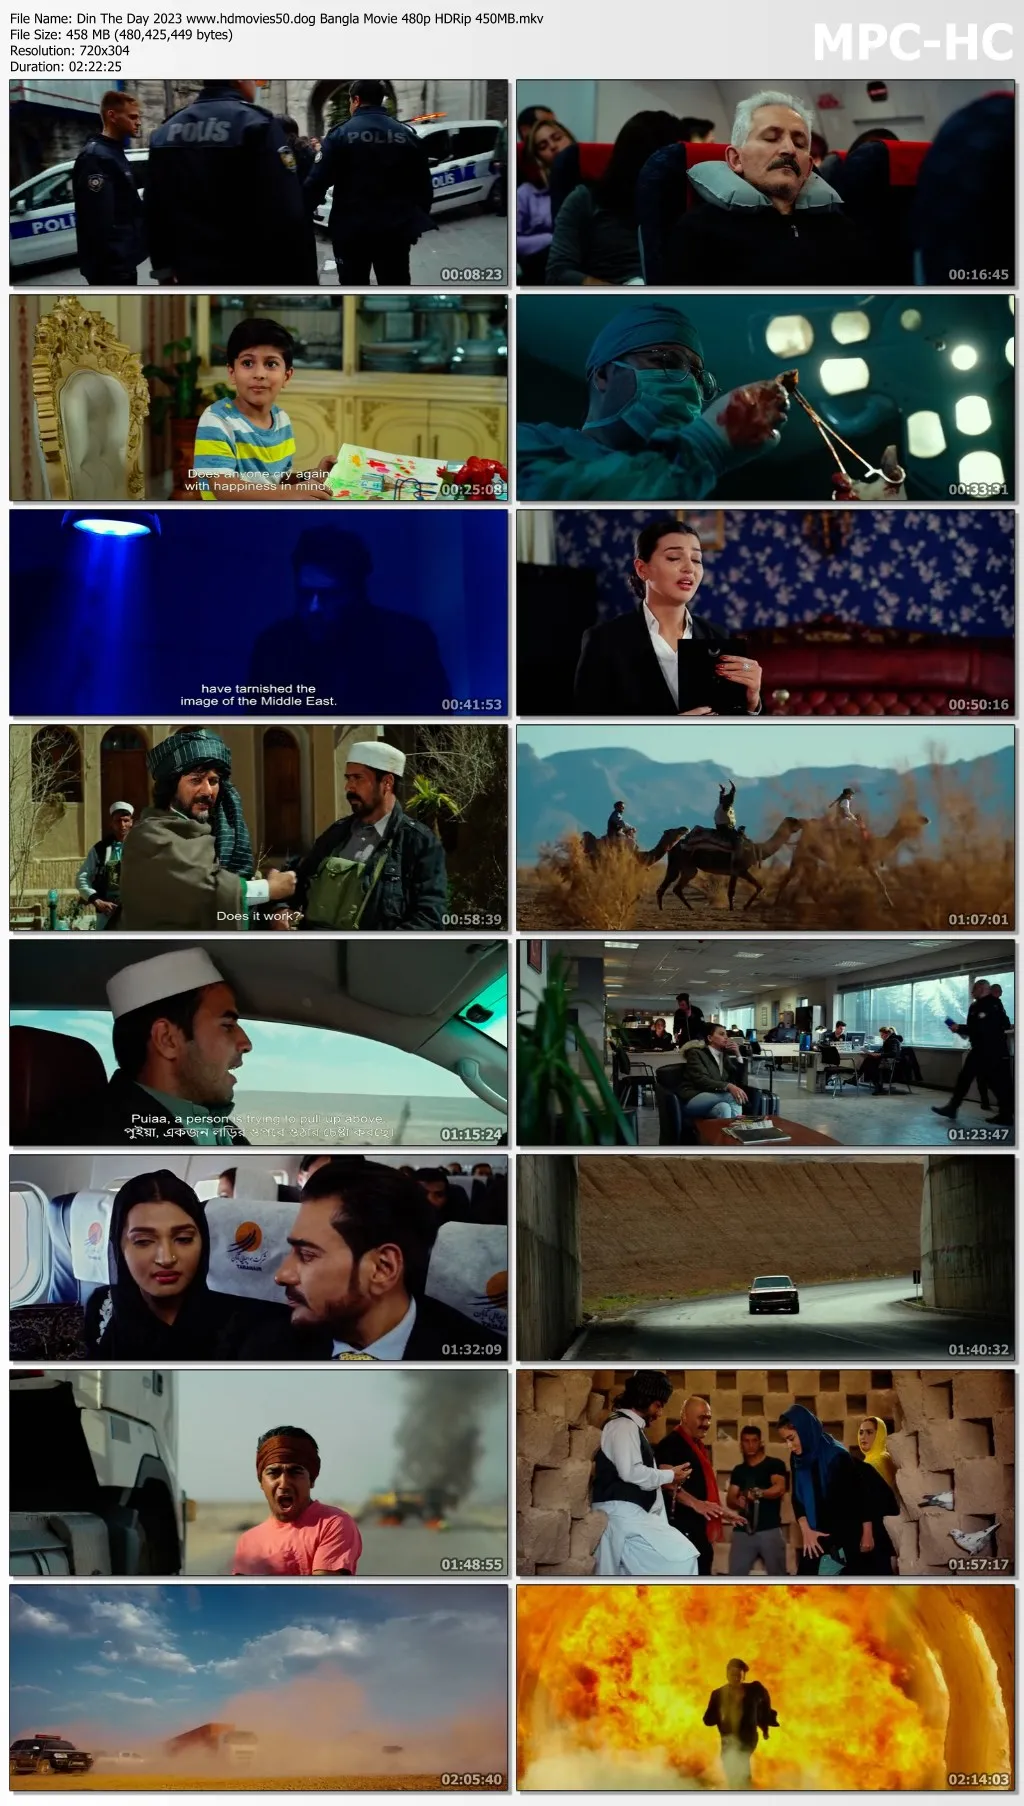 Din The Day 2023 Bangla Movie 480p HDRip 450MB Download